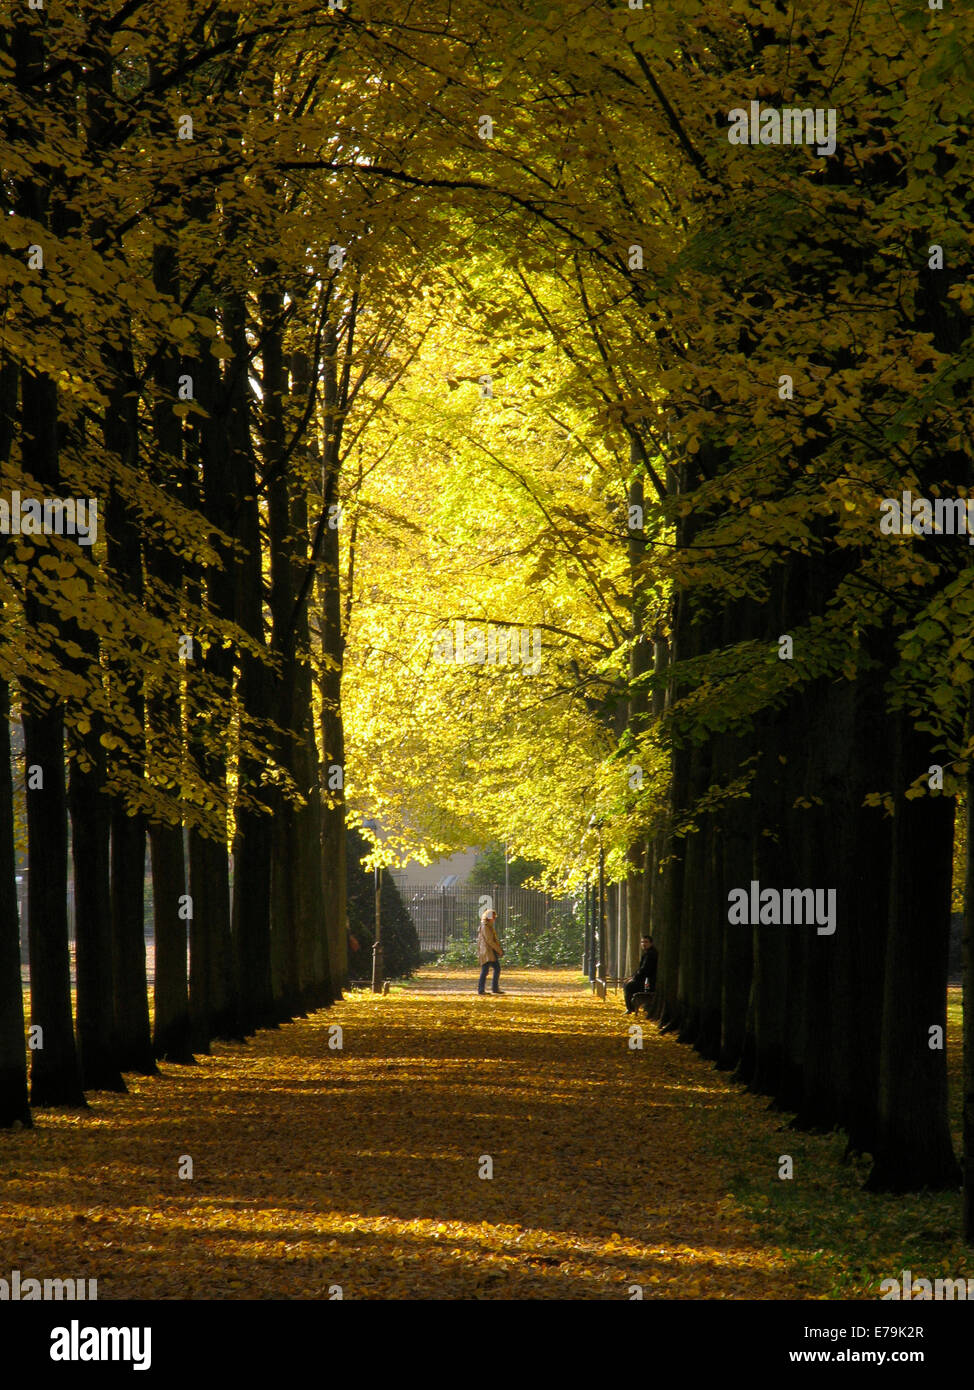 Colorful are the autumn leaves on the various trees in the French Garden of Celle. The park is a utility and pleasure garden in the court yard tradition of the early 17th century. Photo: Klaus Nowottnick Date: October 31, 2011 Stock Photo